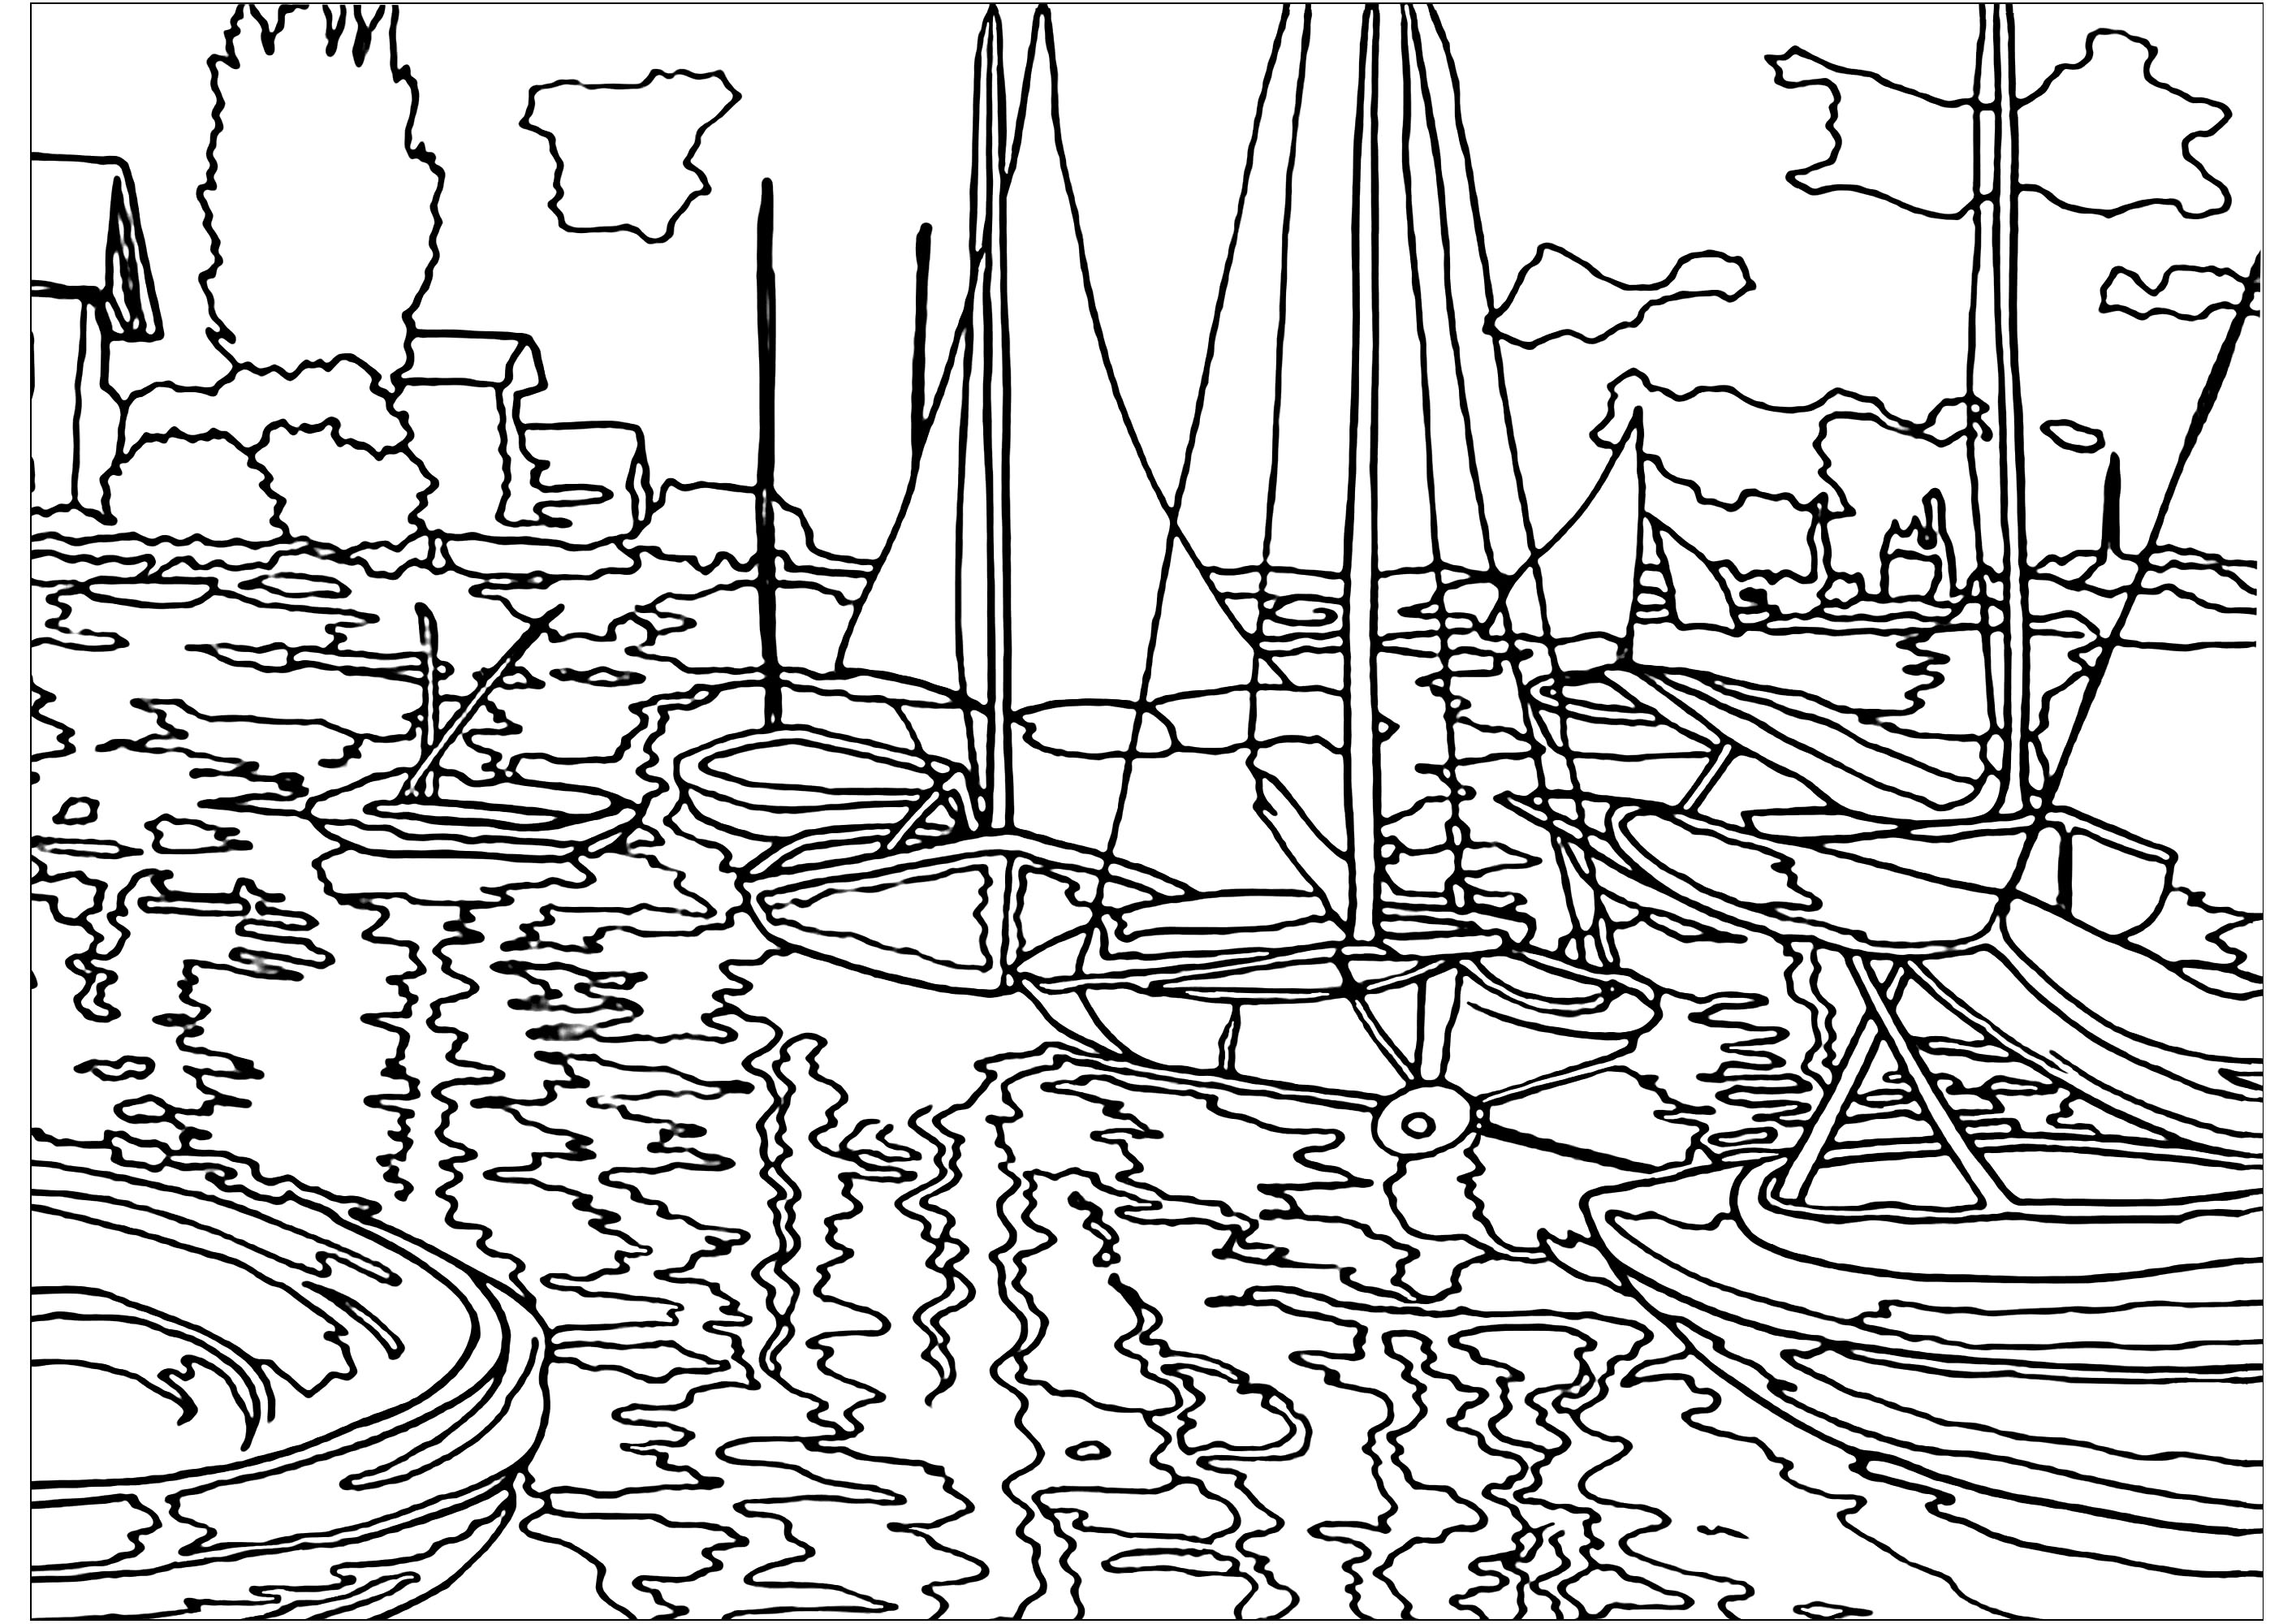 Easy Monet coloring for kids